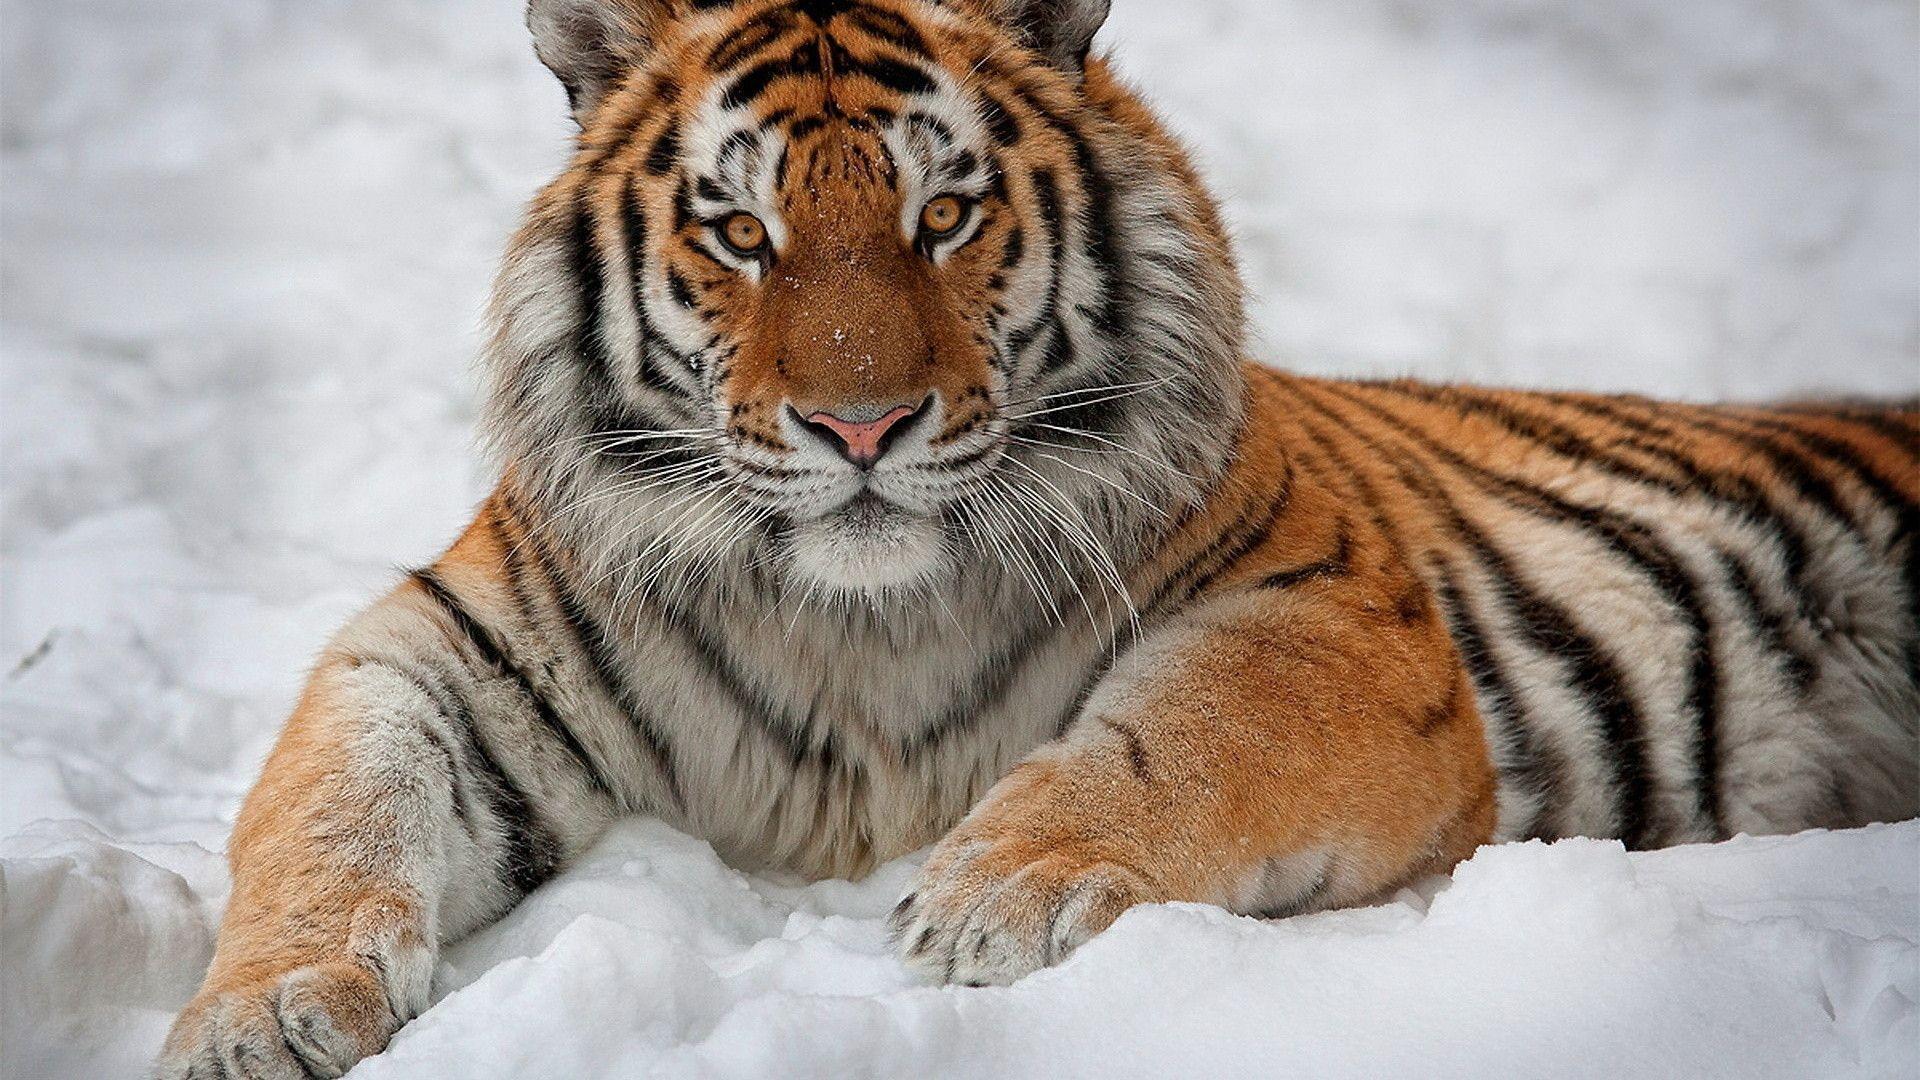 tiger wallpaper download Search Engine